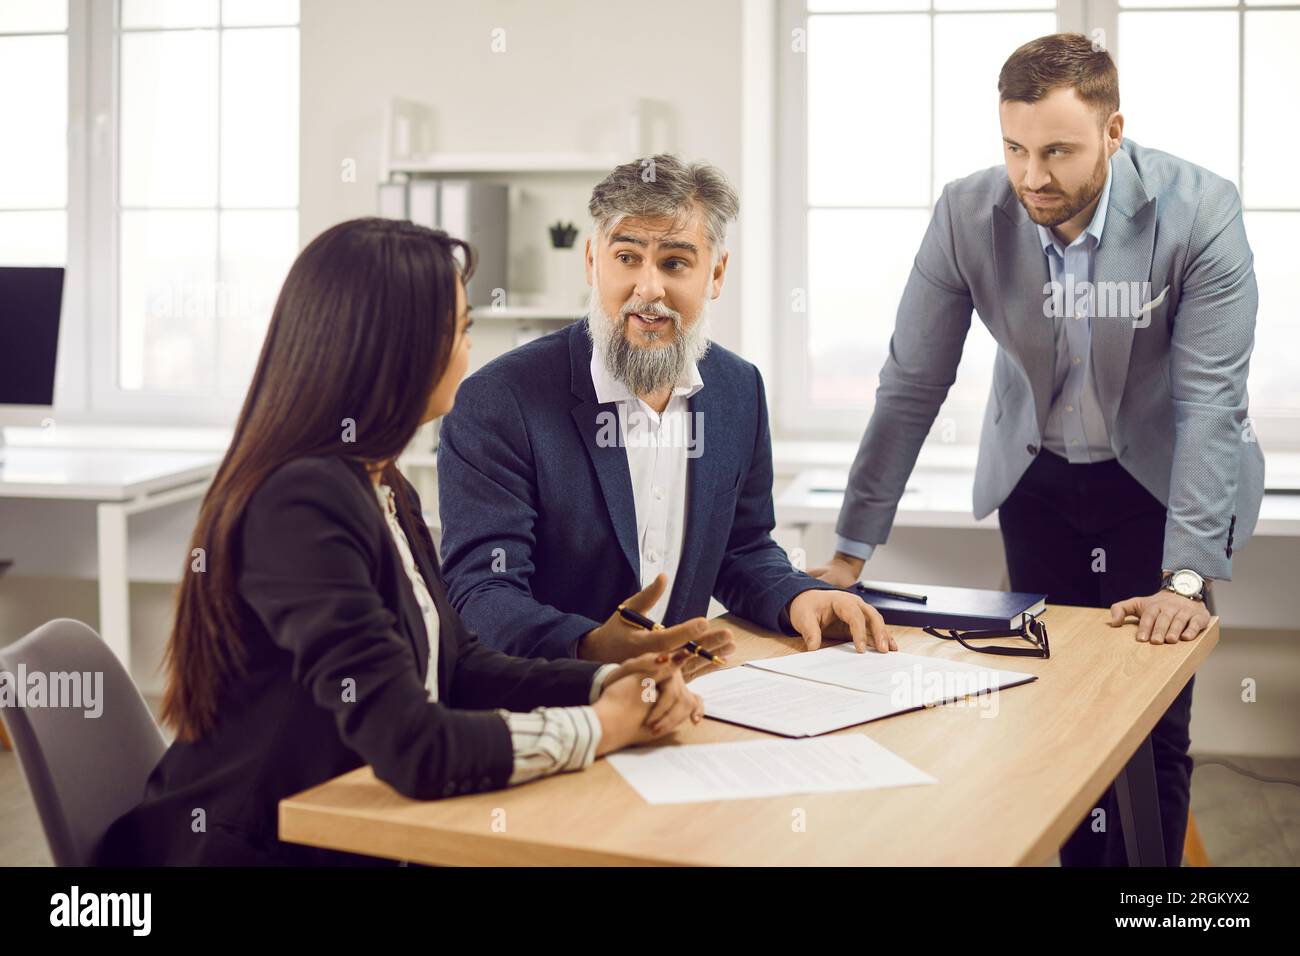 Corporate business people having a meeting in office, discussing new project or signing a contract Stock Photo